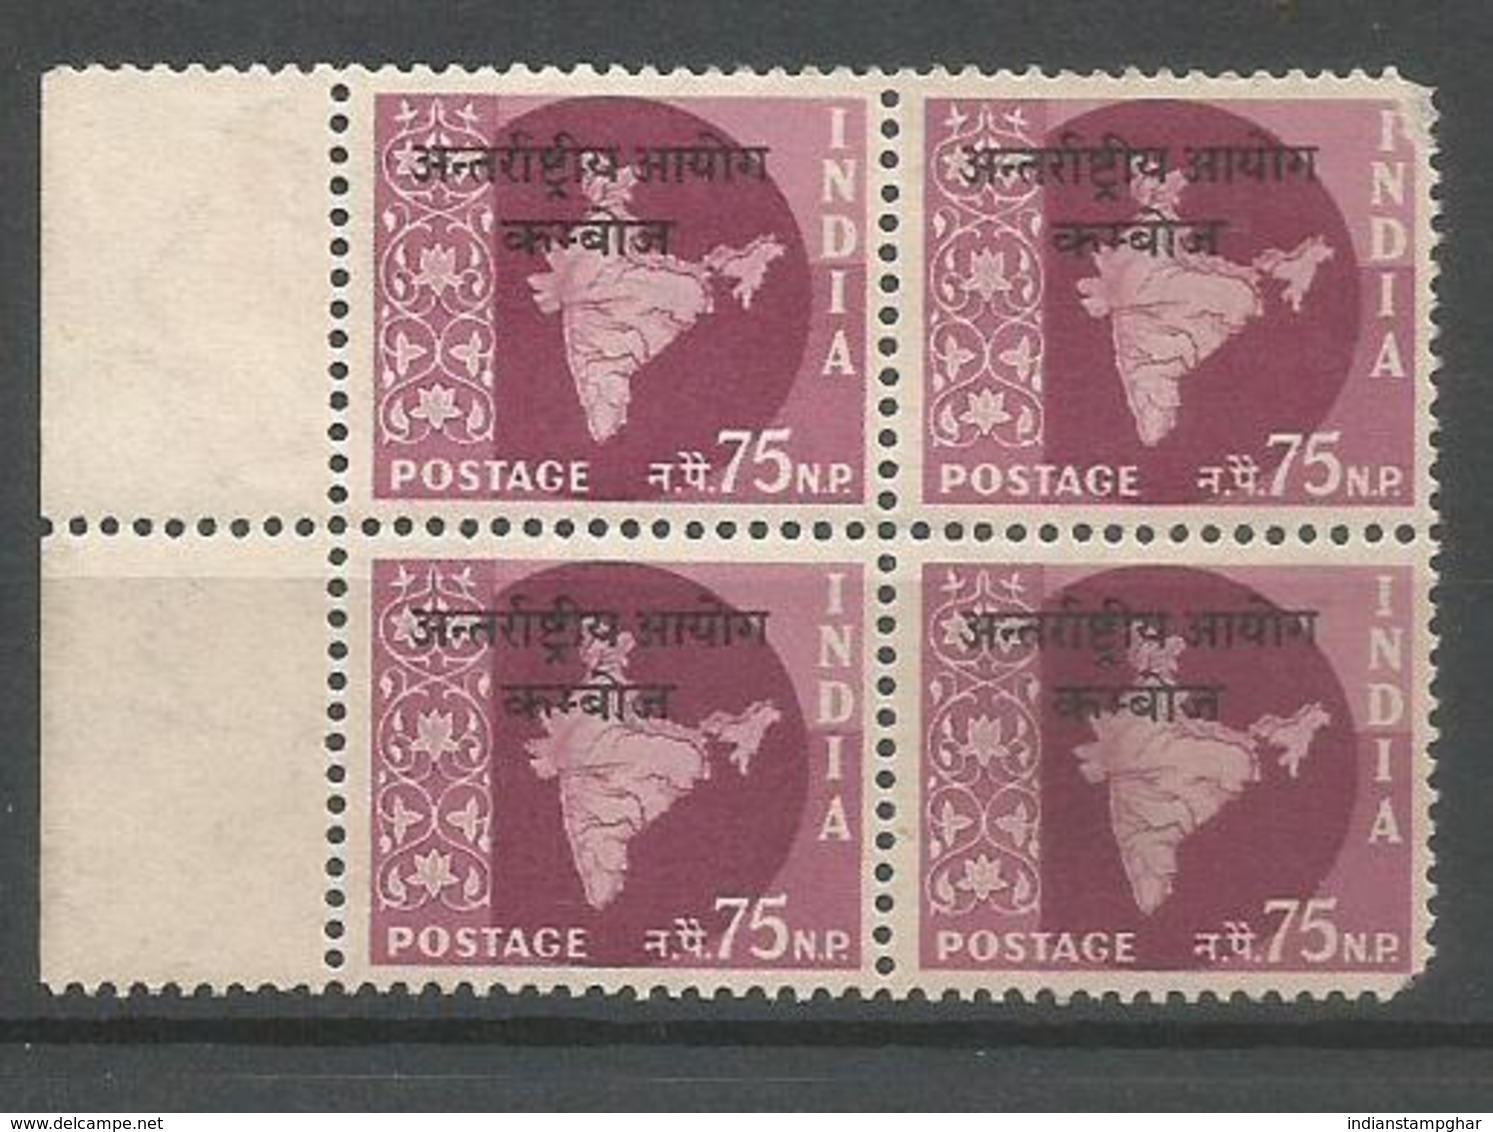 Cambodia Opvt. On 75np Map, Block Of 4,MNH 1962 Star Wmk, Military Stamps, As Per Scan - Franchise Militaire